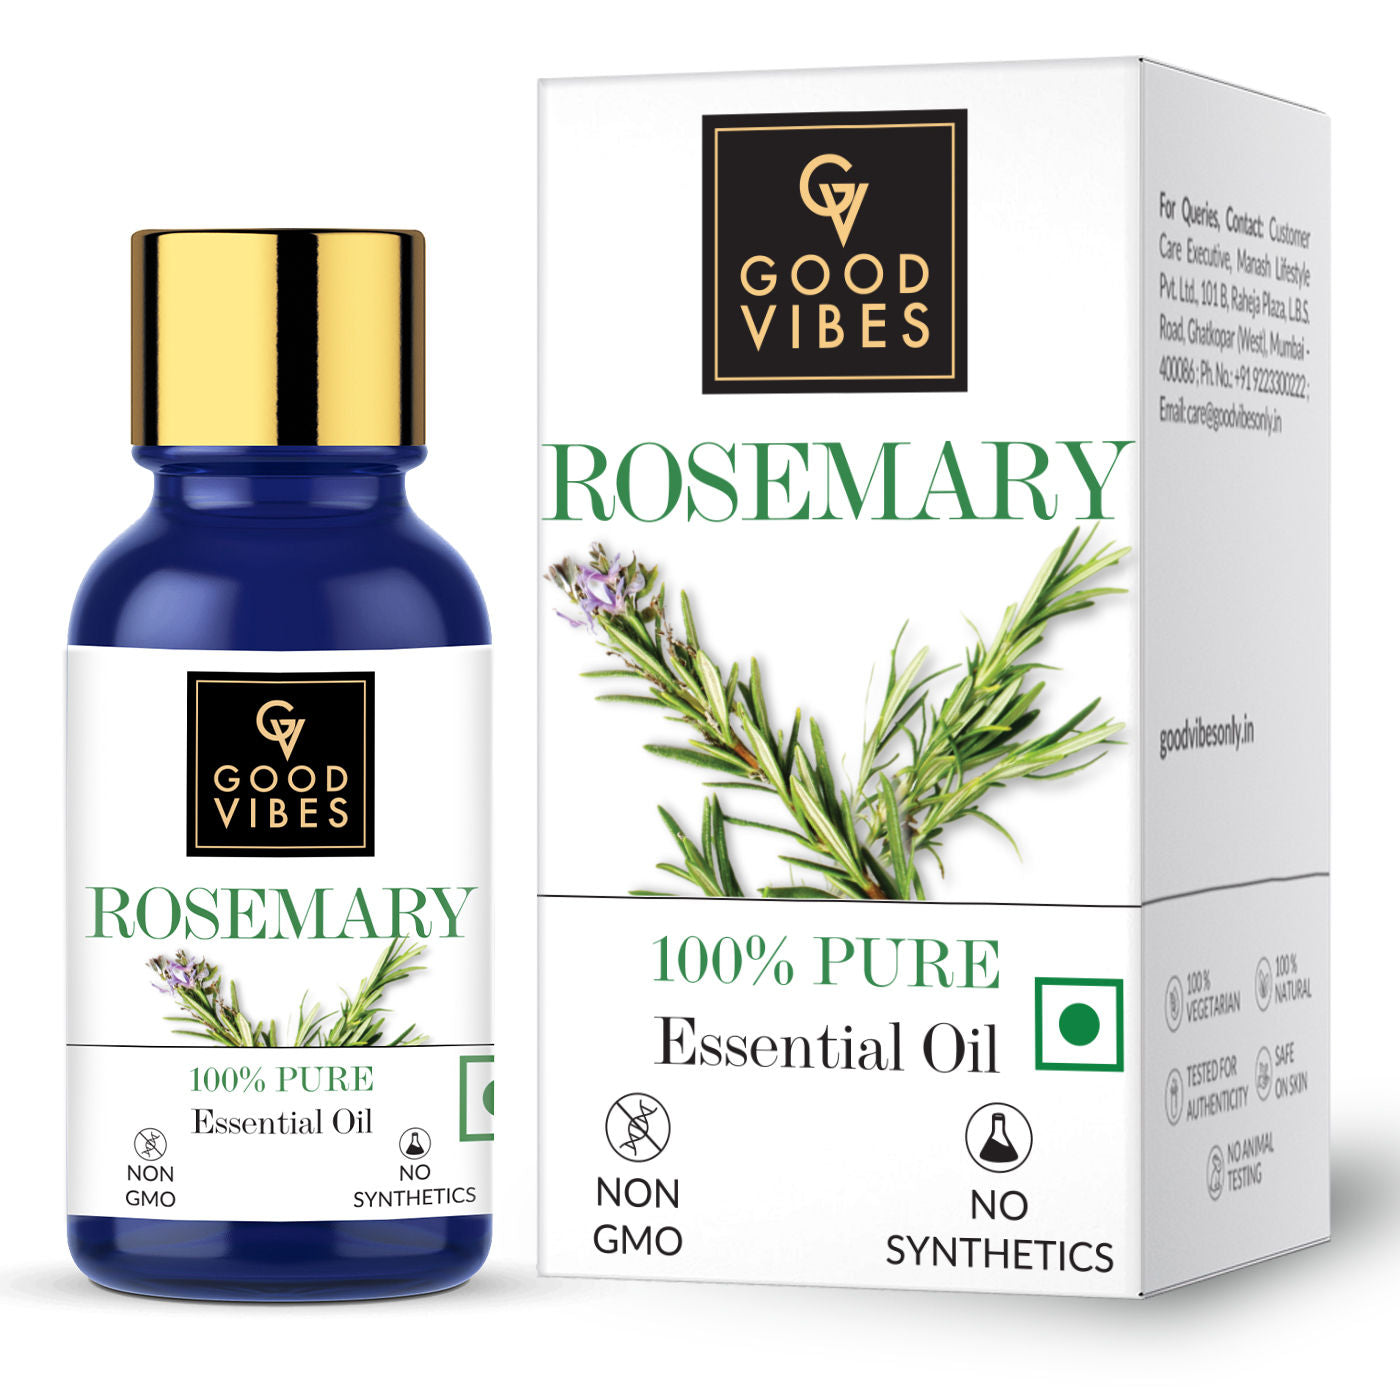 good-vibes-100-percentage-pure-rosemary-essential-oil-10-ml-10-10-1